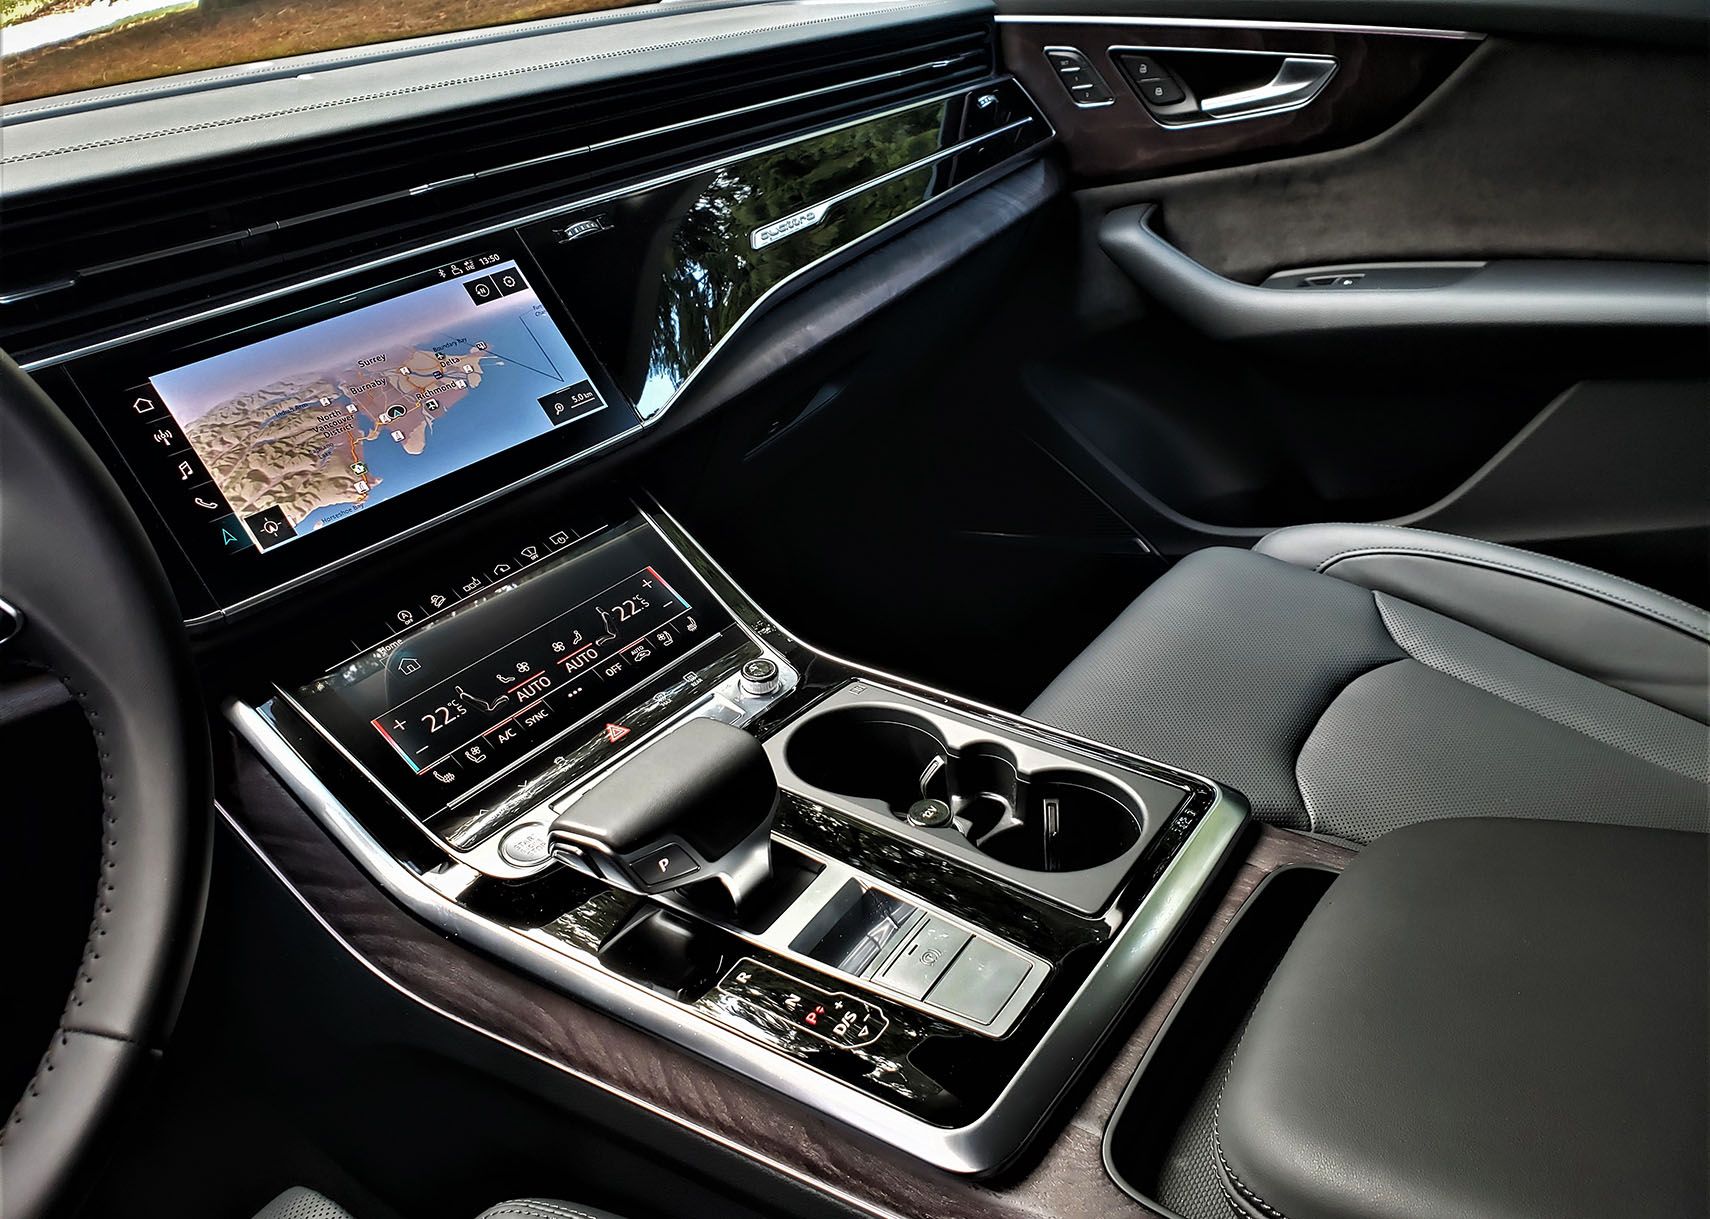 The dash and console layout is modern car perfection.